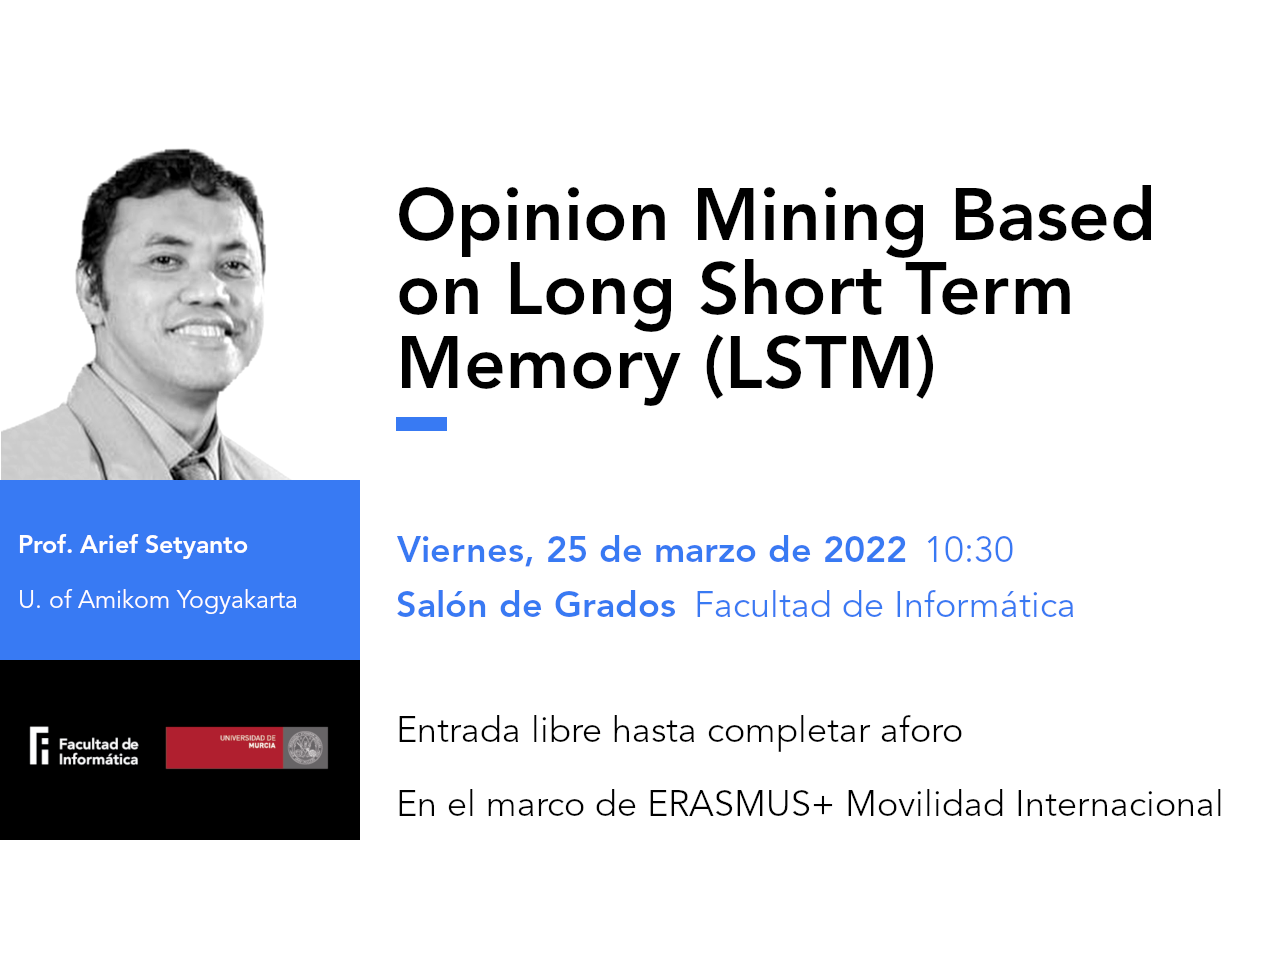 Charla: “Opinion Mining Based on Long Short Term Memory (LSTM)”